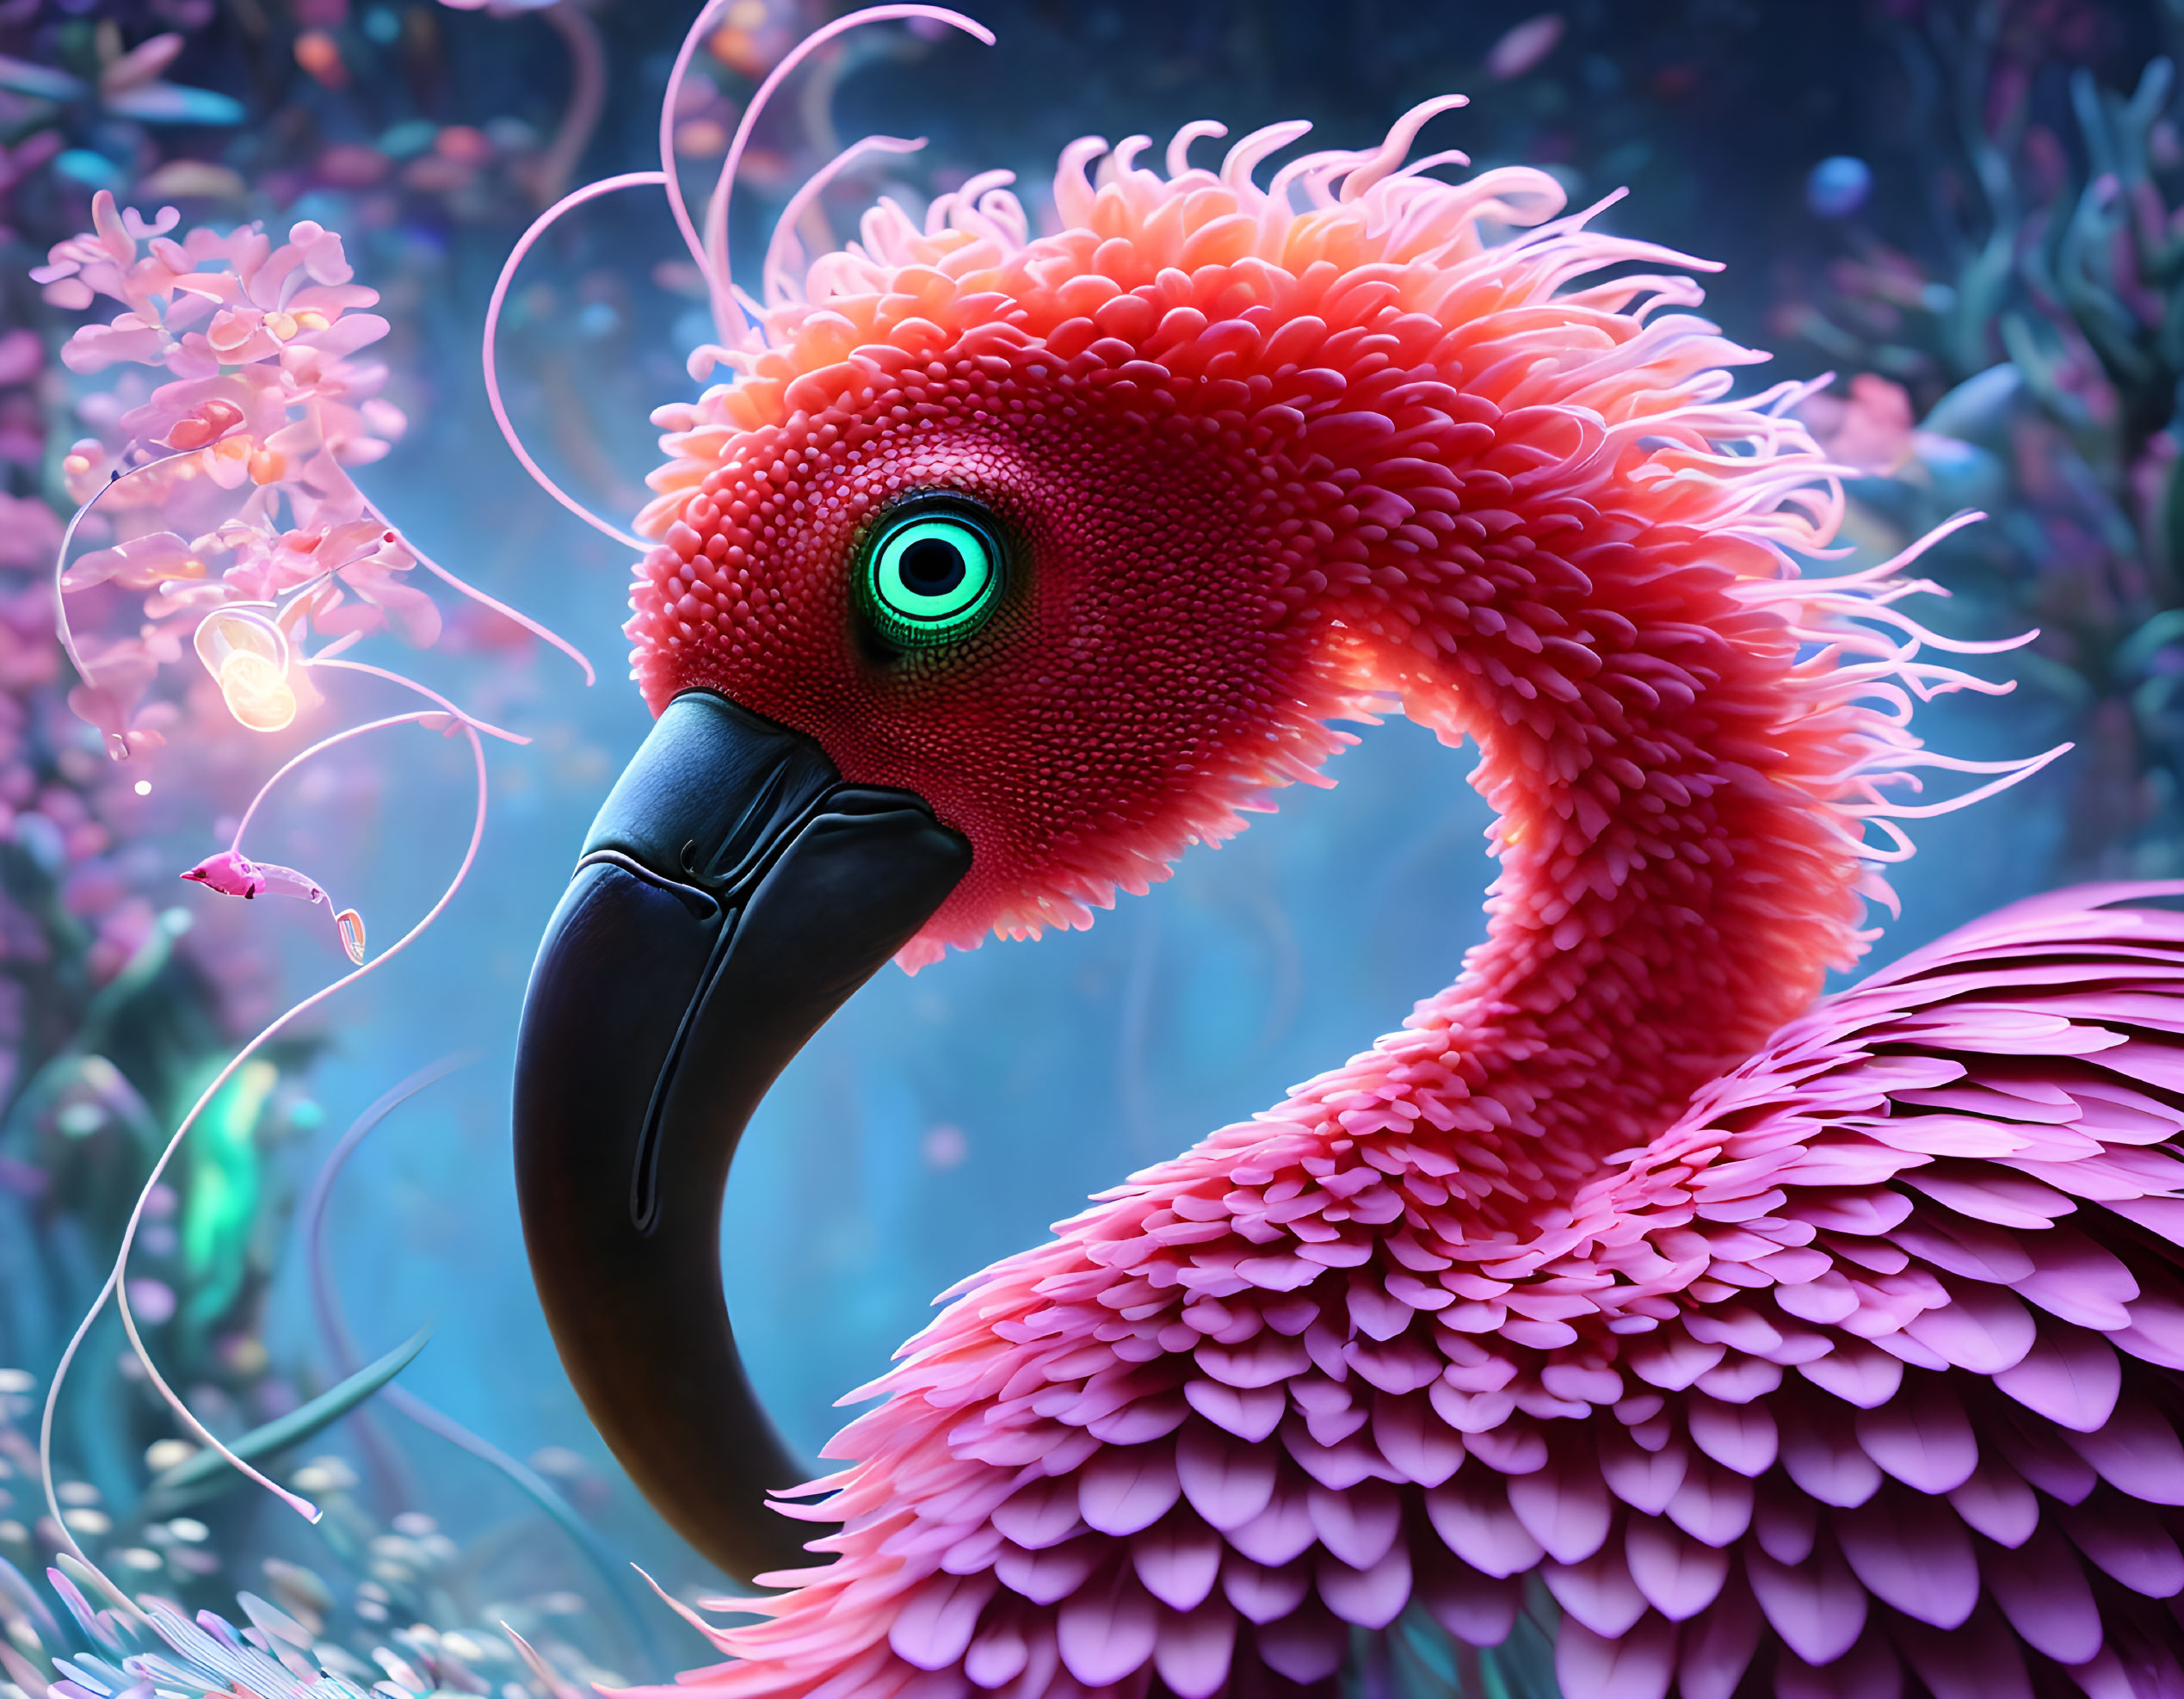 Colorful Digital Artwork: Flamingo with Red Plumage and Green Eye in Fantasy Flora